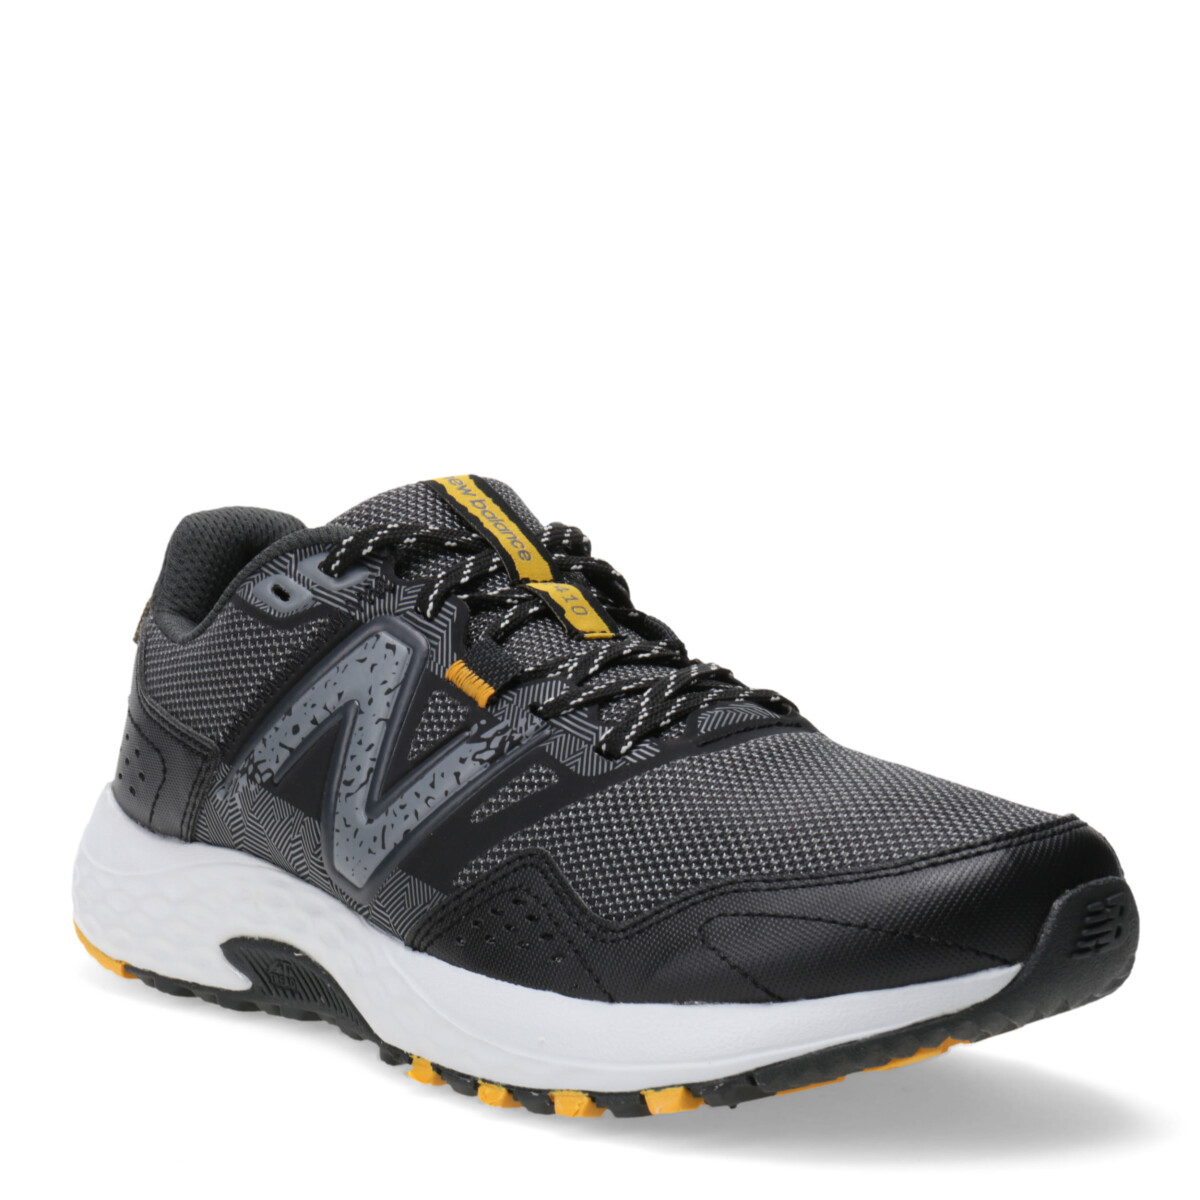 Trail Running Course New Balance - Gris/Negro/Mostaza 